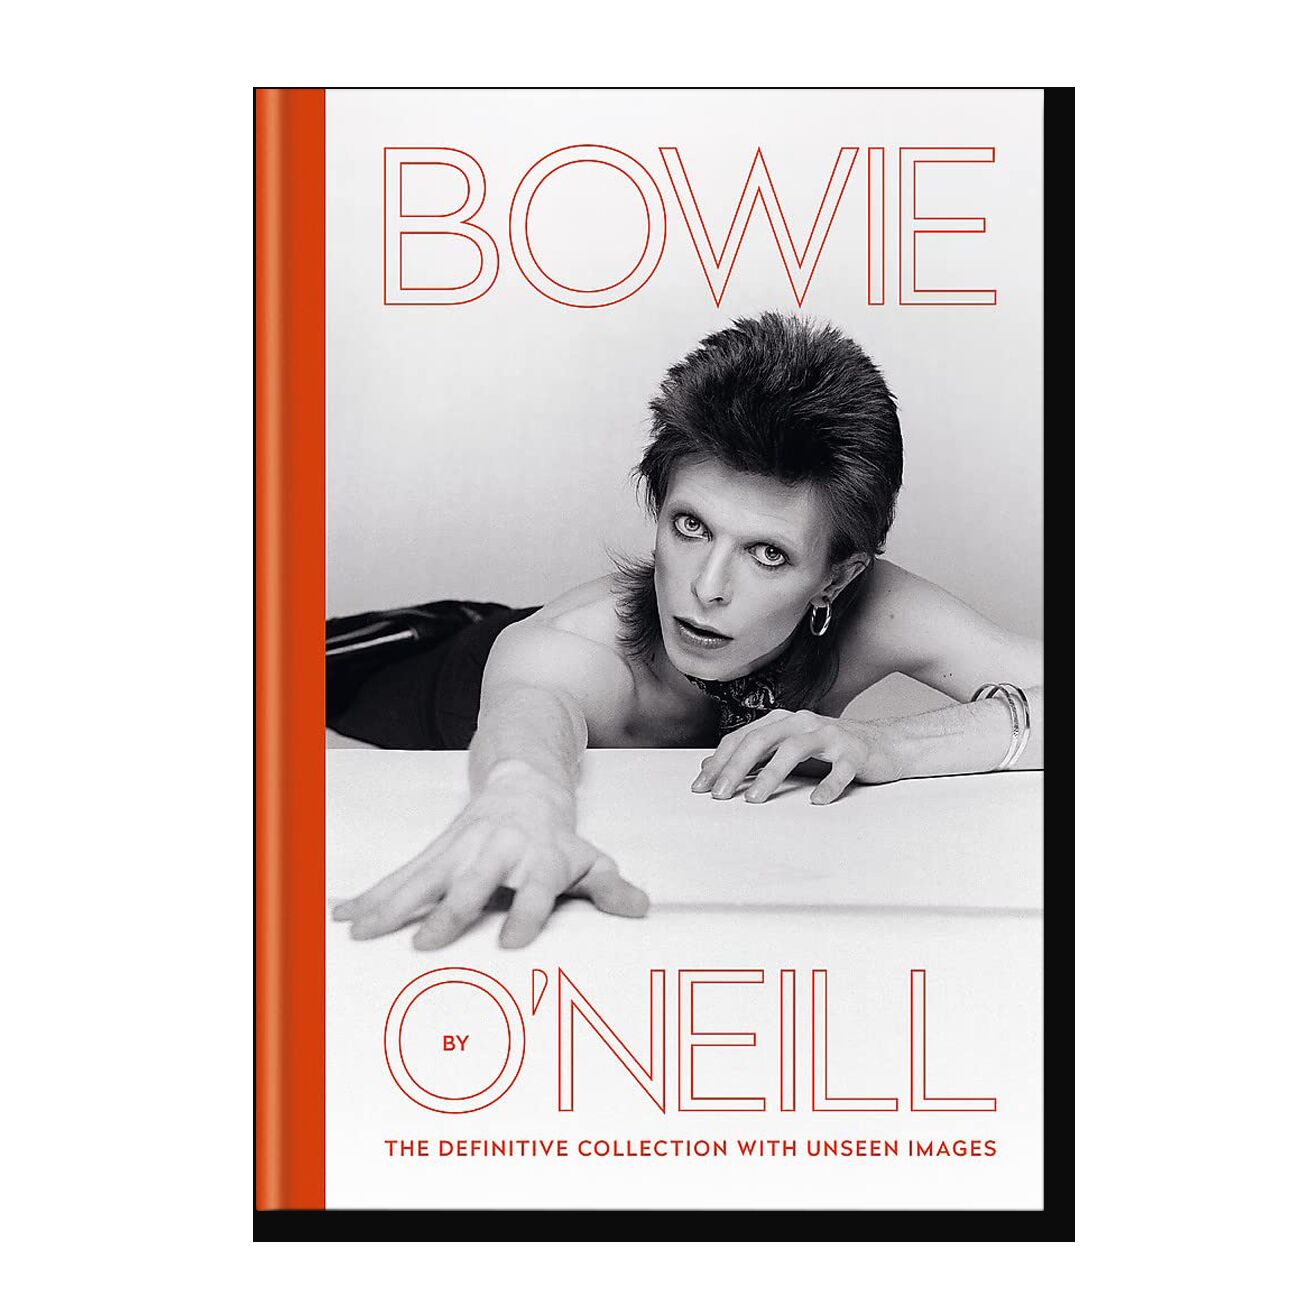 Bowie by O'Neill: The definitive collection with unseen images